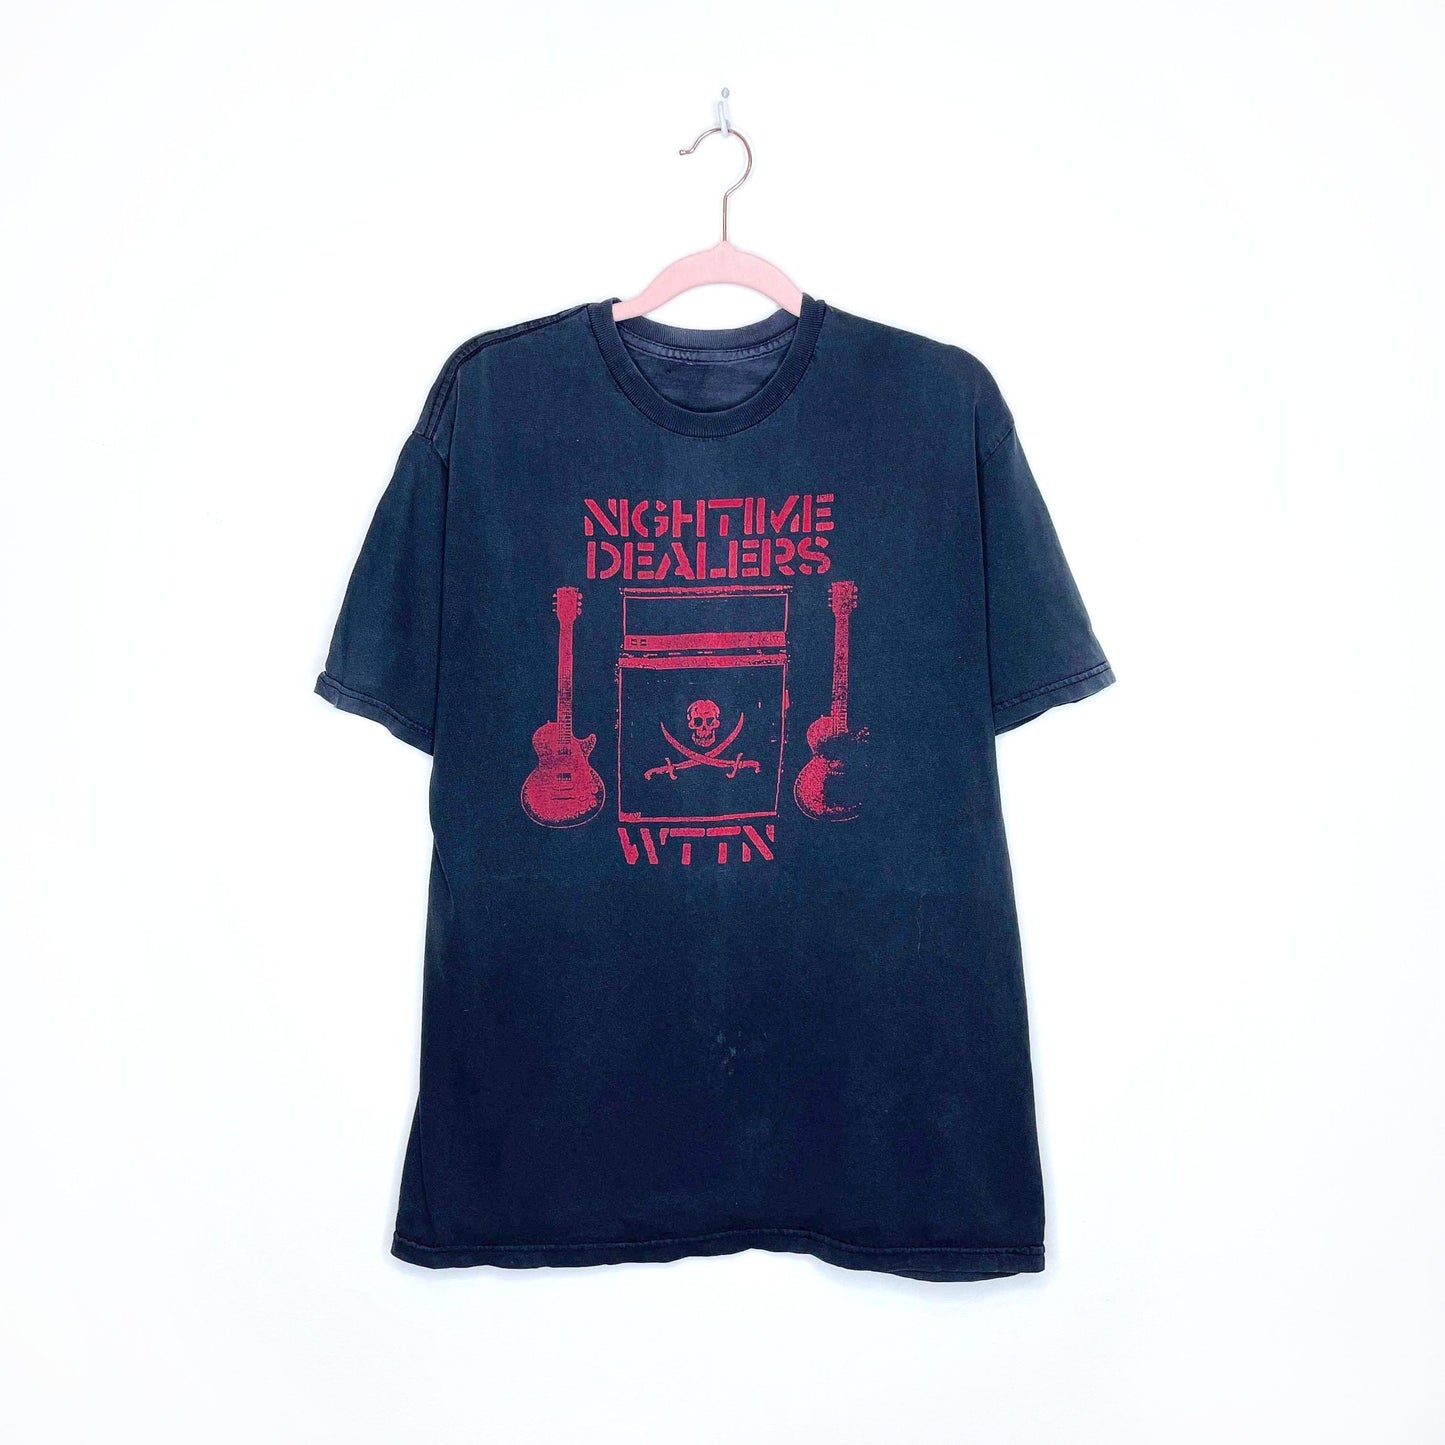 vintage nightime dealers wttn band tee - size small